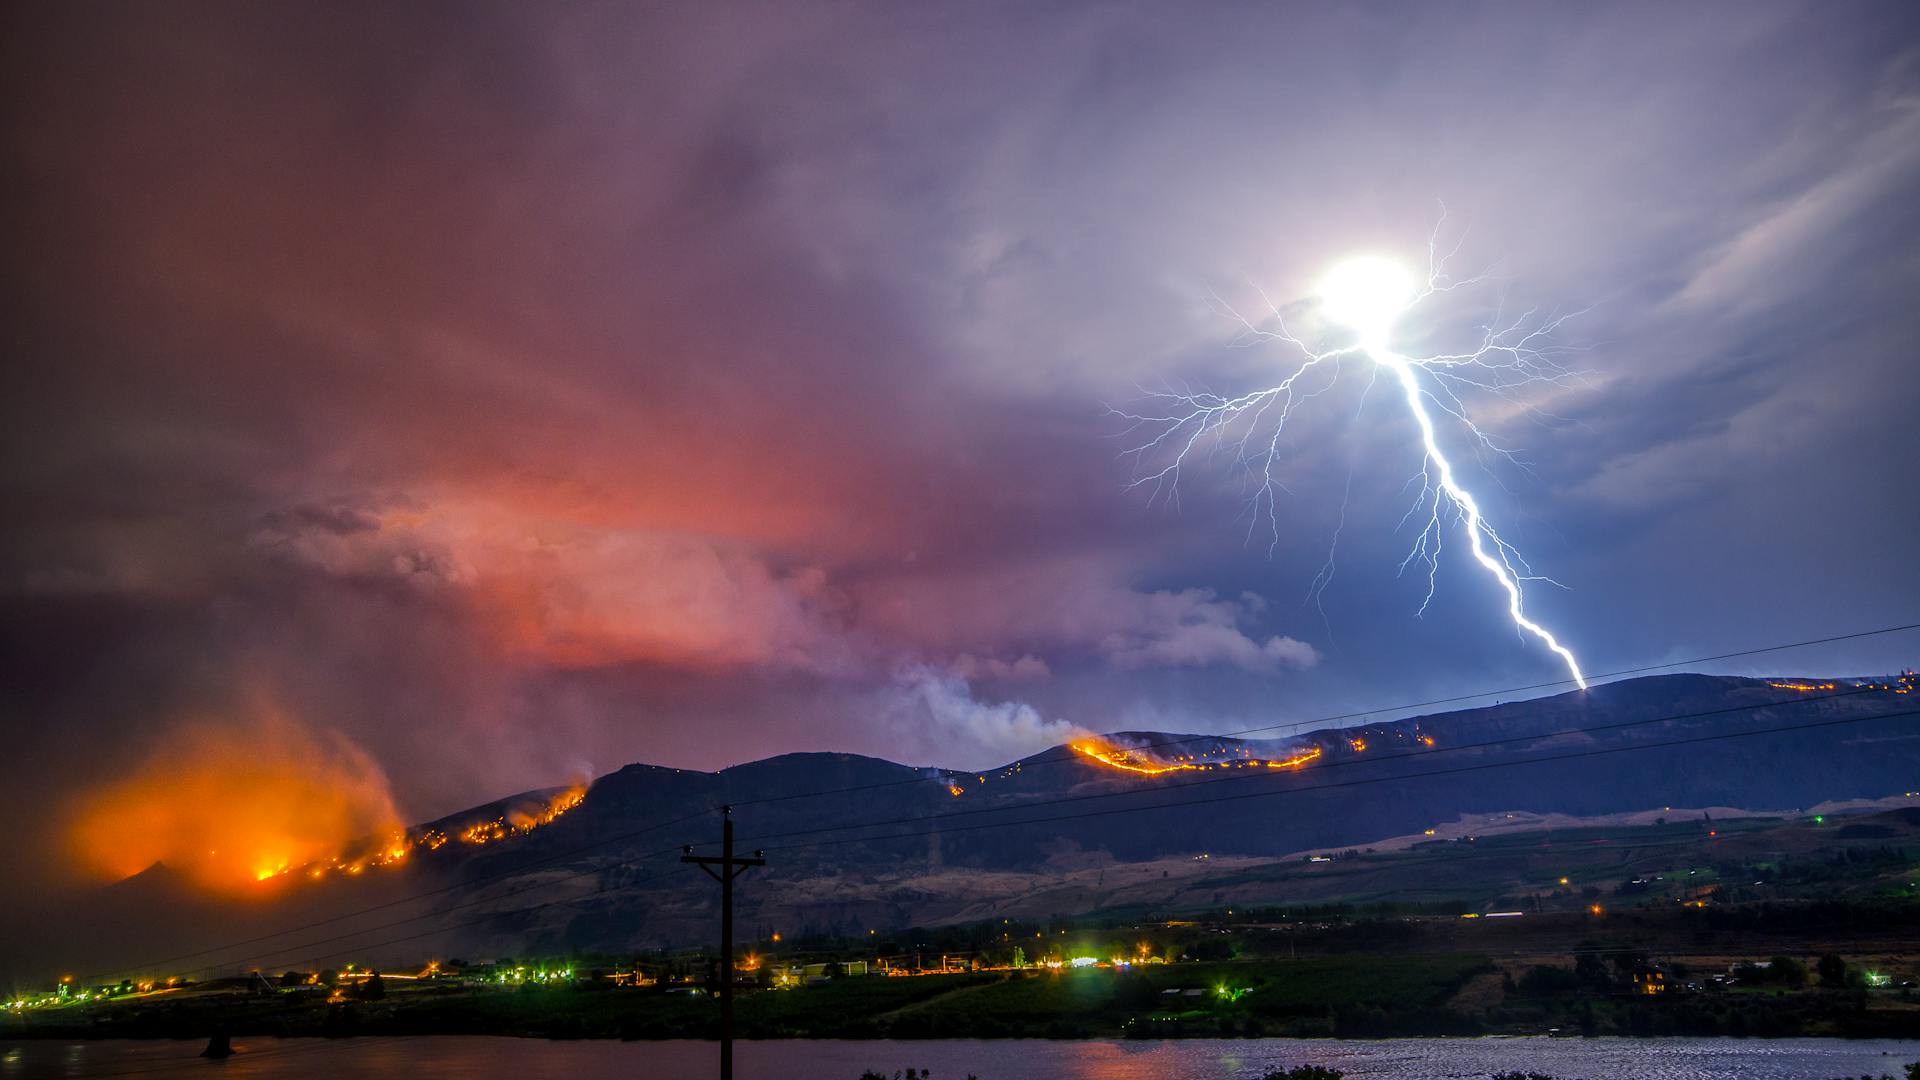 Lightning Strike on Mountain | Photo by Frank Cone